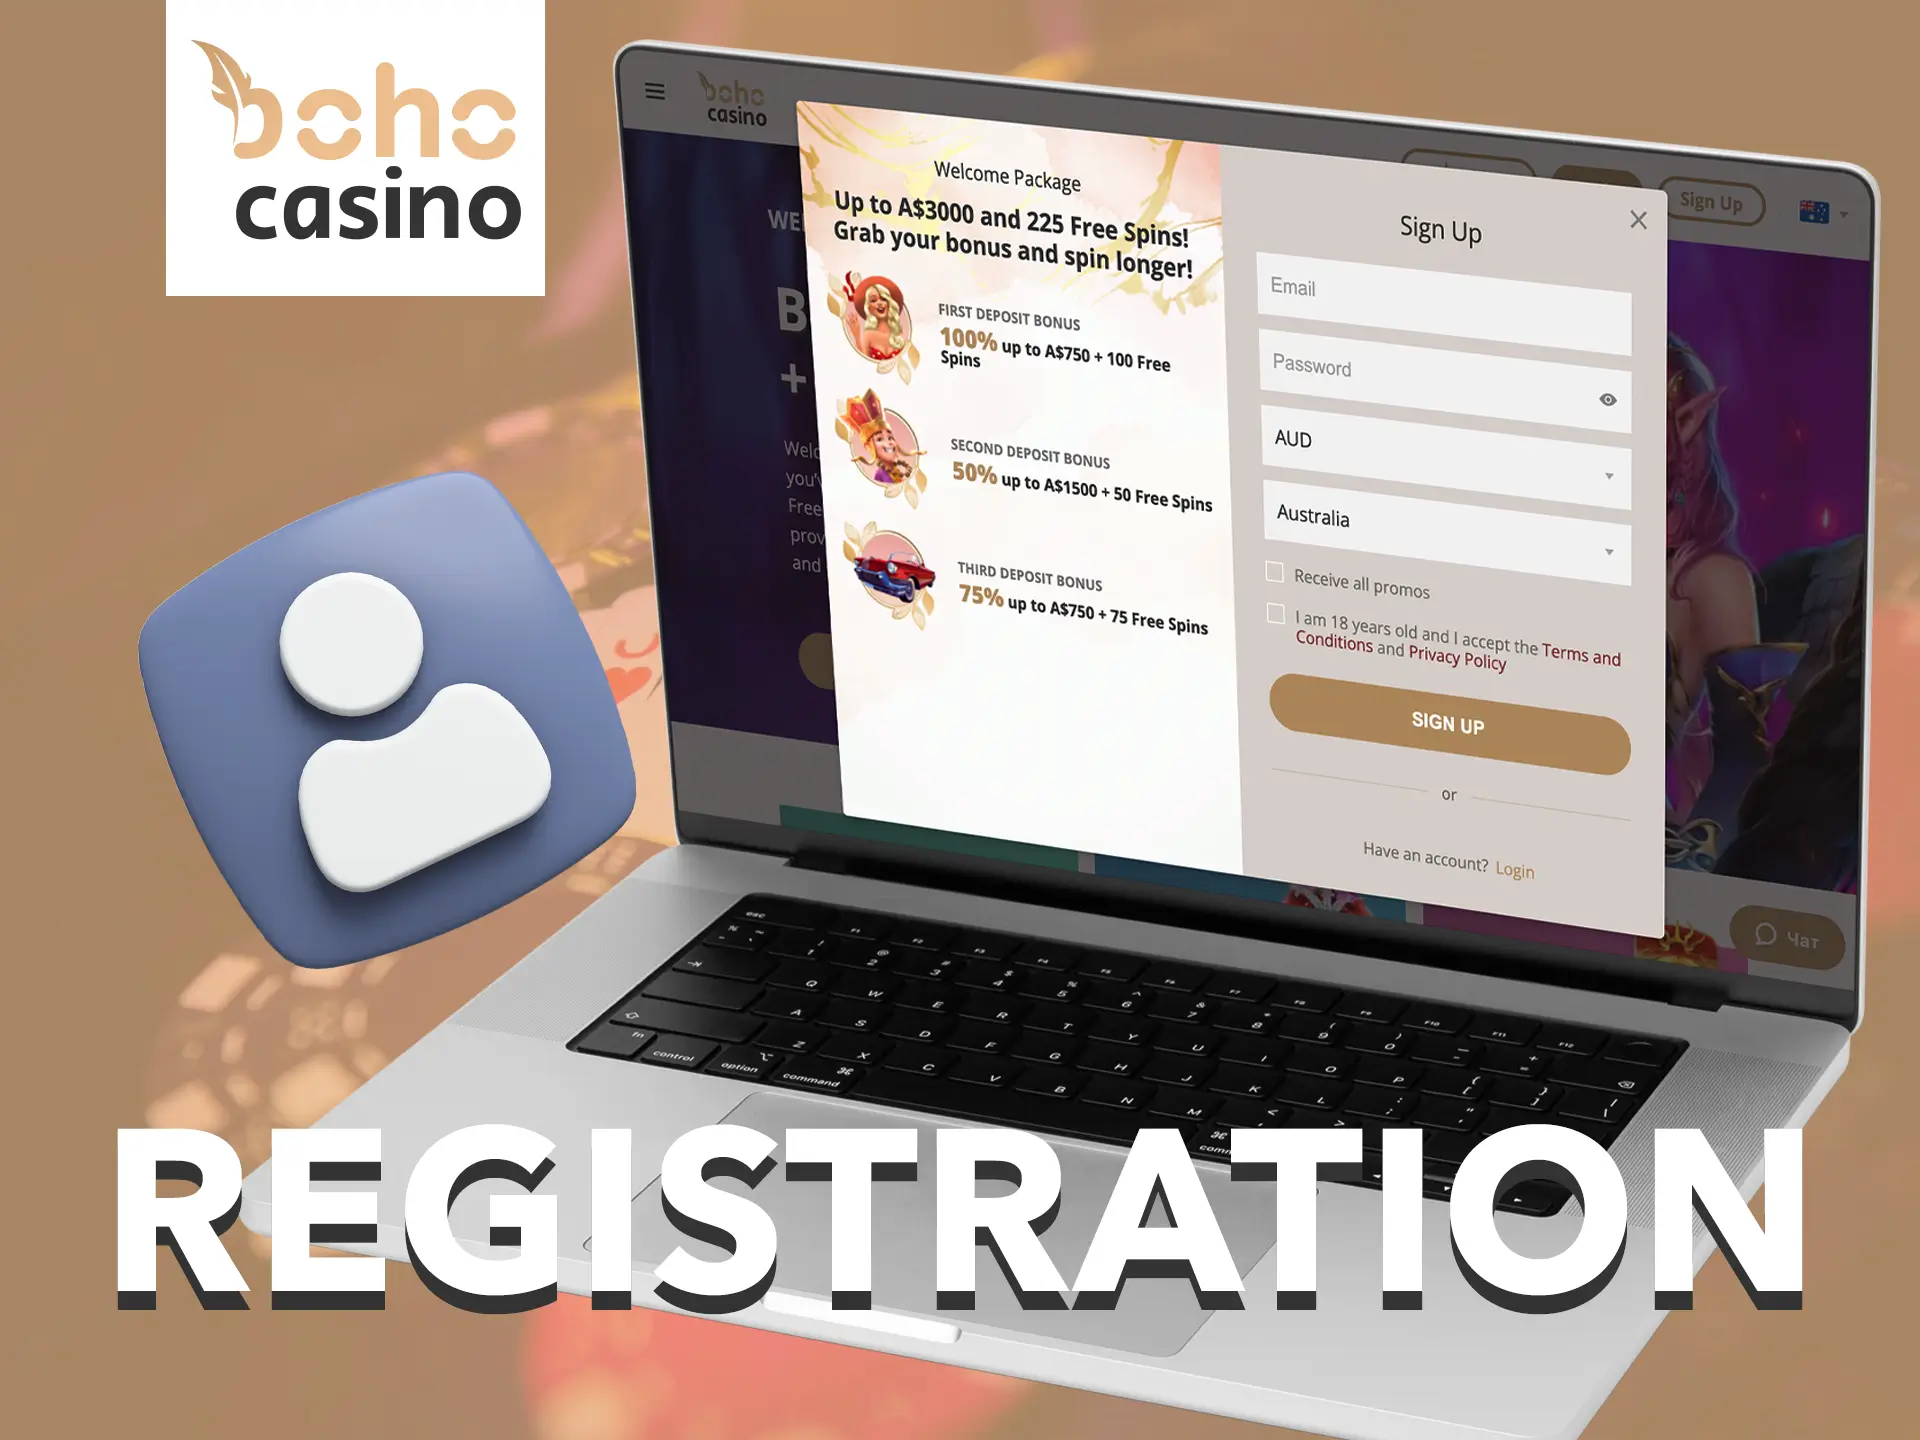 Complete a simple registration at Boho Casino to gain full access to the site's features.